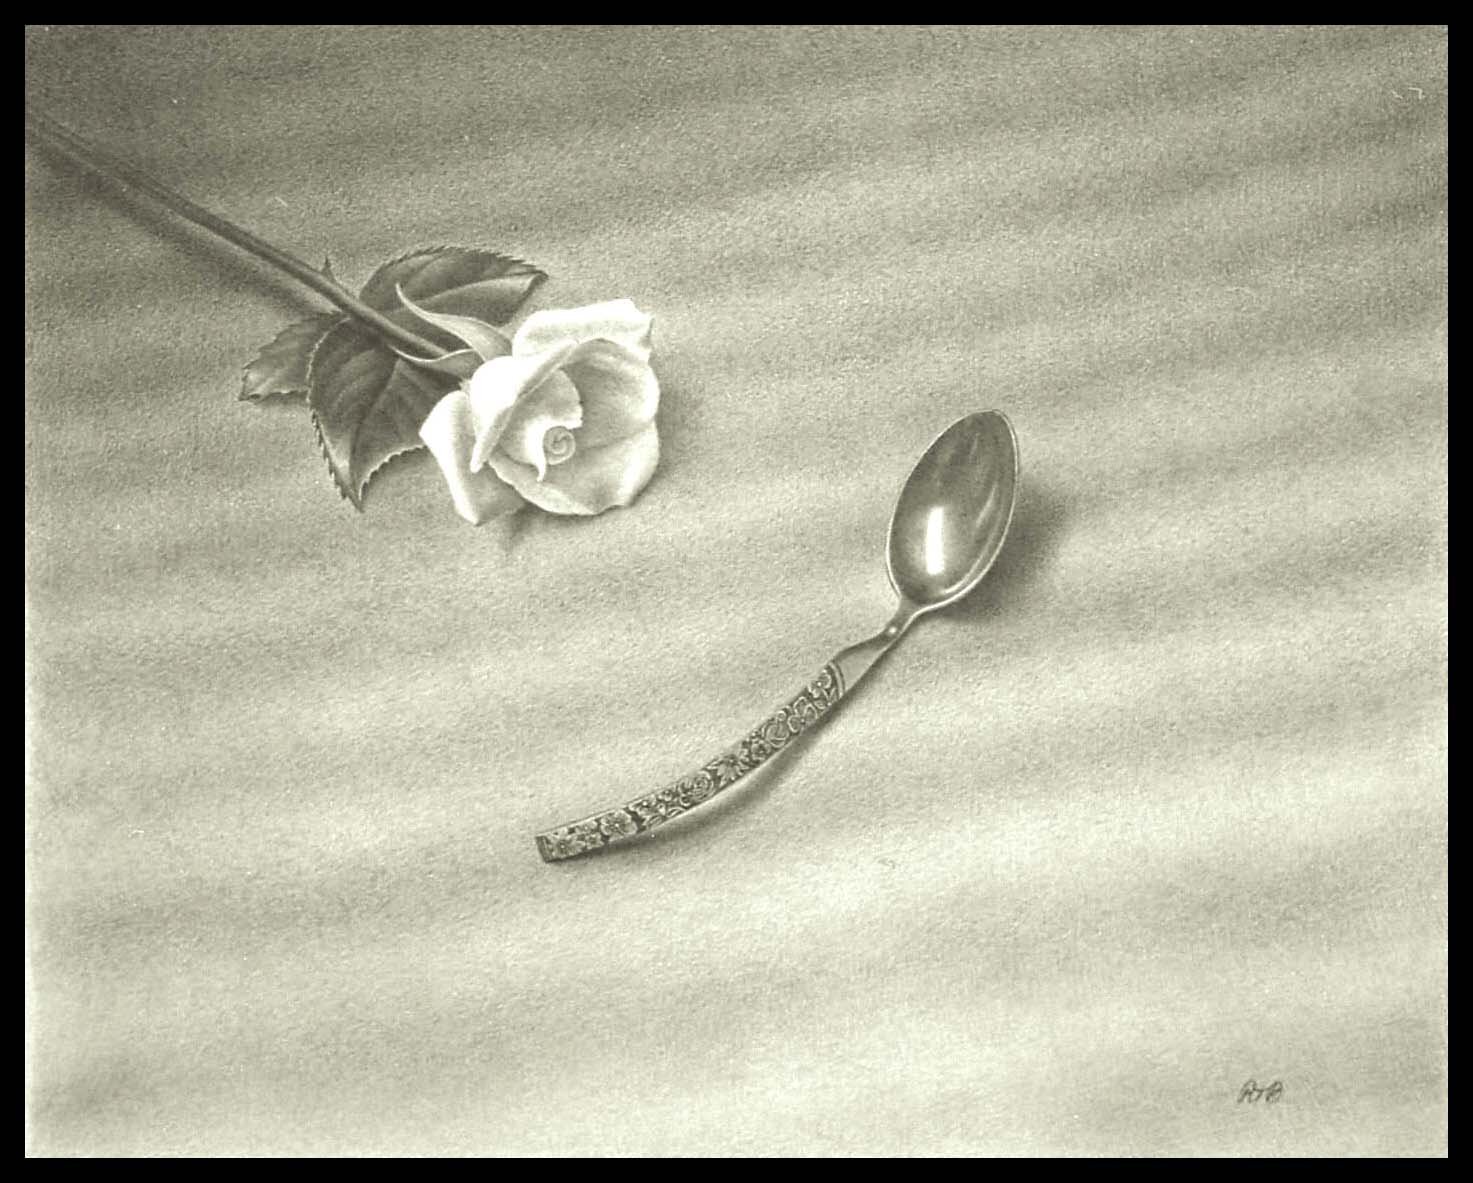  Rose and Spoon (11.5”x14.5”) Graphite on Matboard 